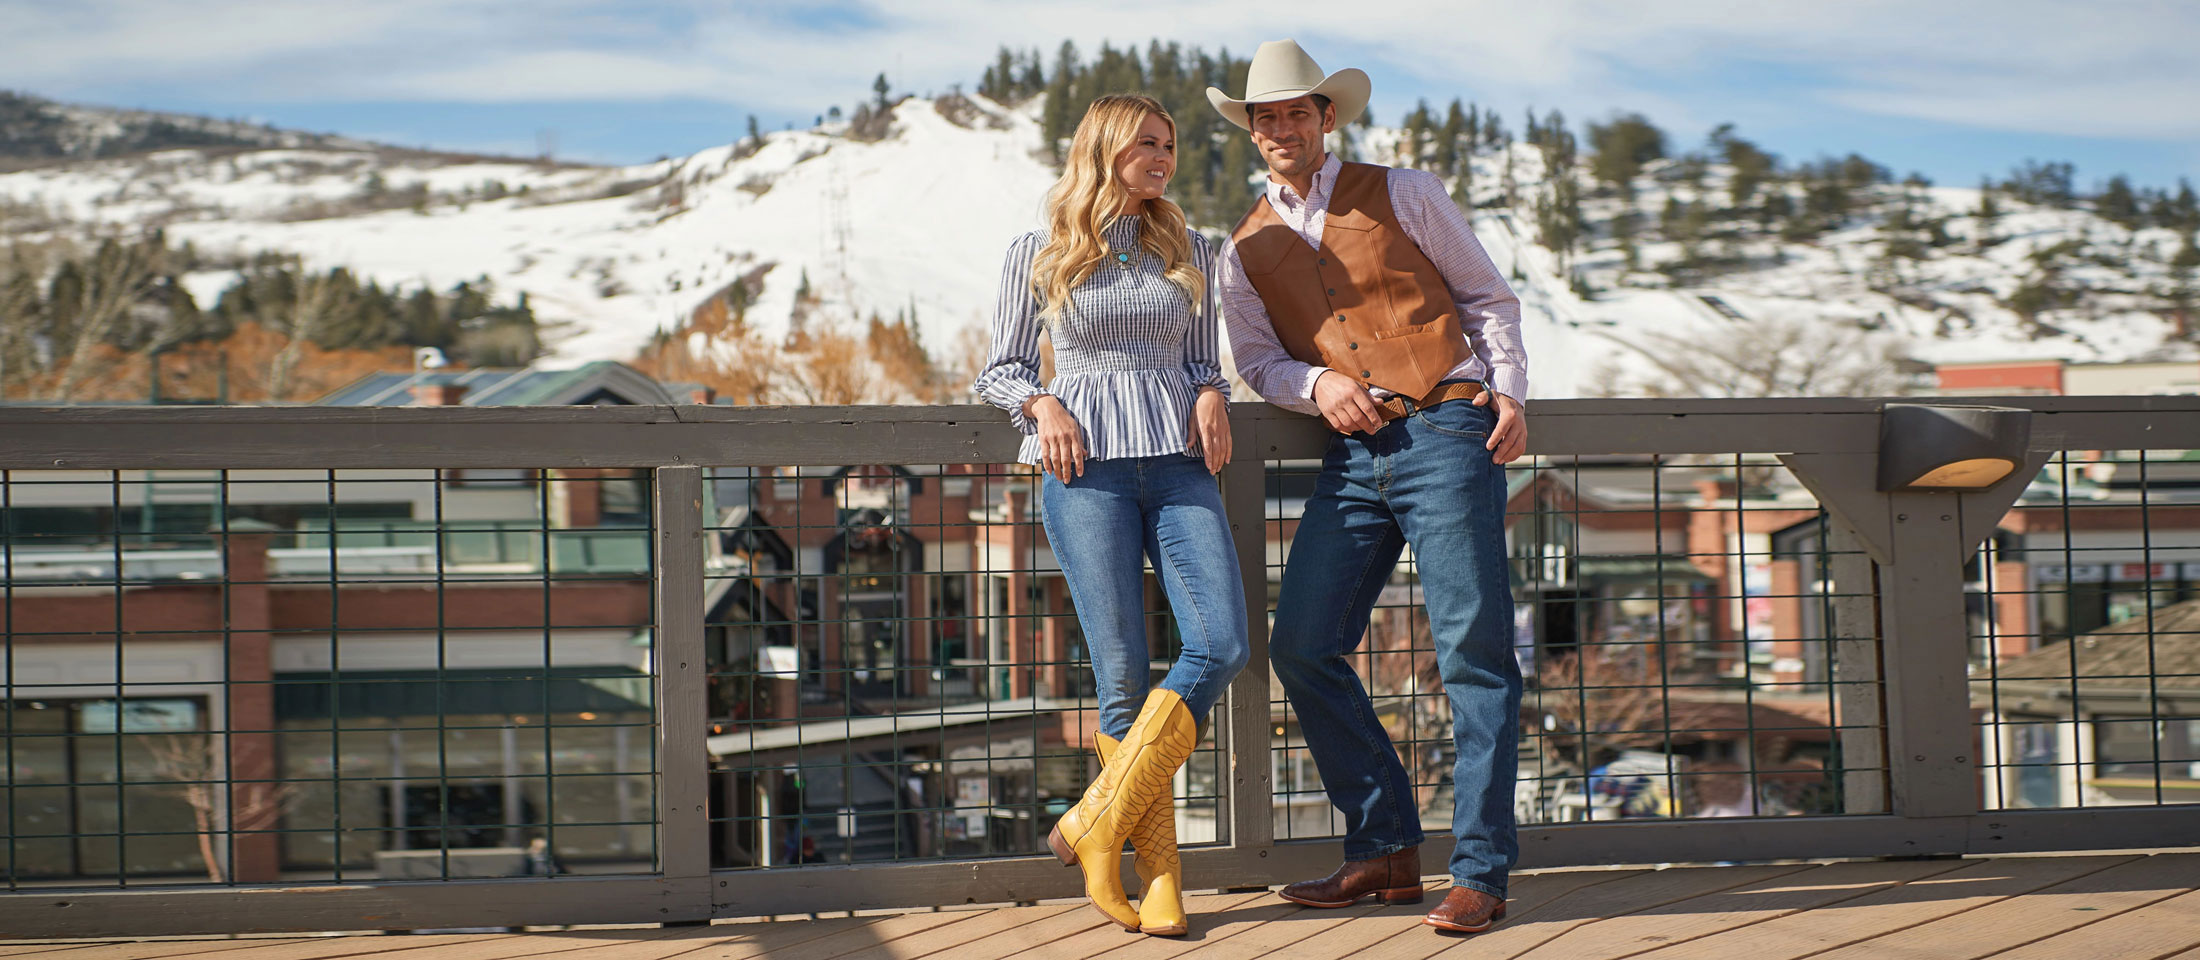 A man and woman standing on a patio wearing cowboy boots. The woman is wearing a blouse shirt and jeans while the man is wearing a shirt, vest, jeans, and cowboy hat.